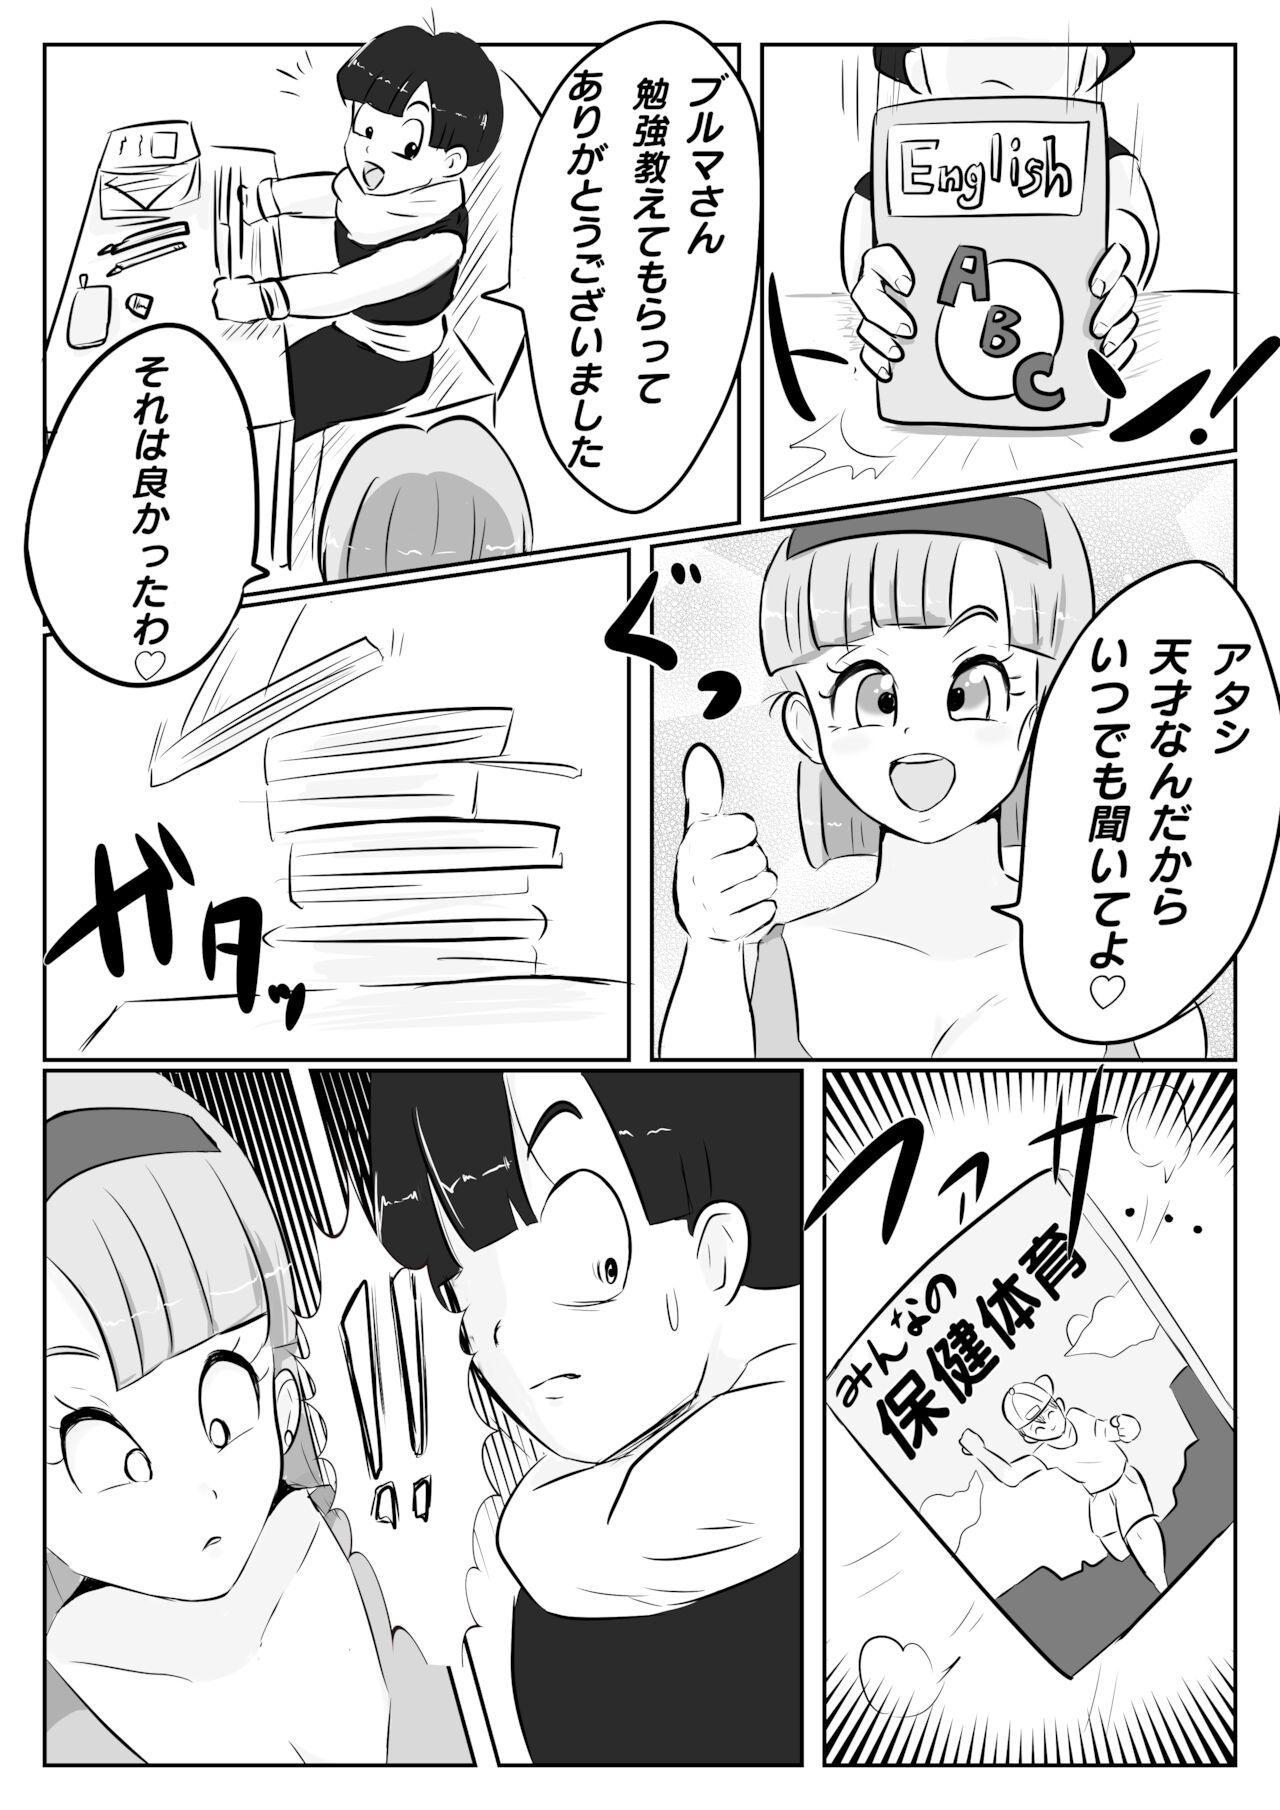 Girl On Girl Why Gohan was thrilled to planet Namek - Dragon ball z Pigtails - Page 9